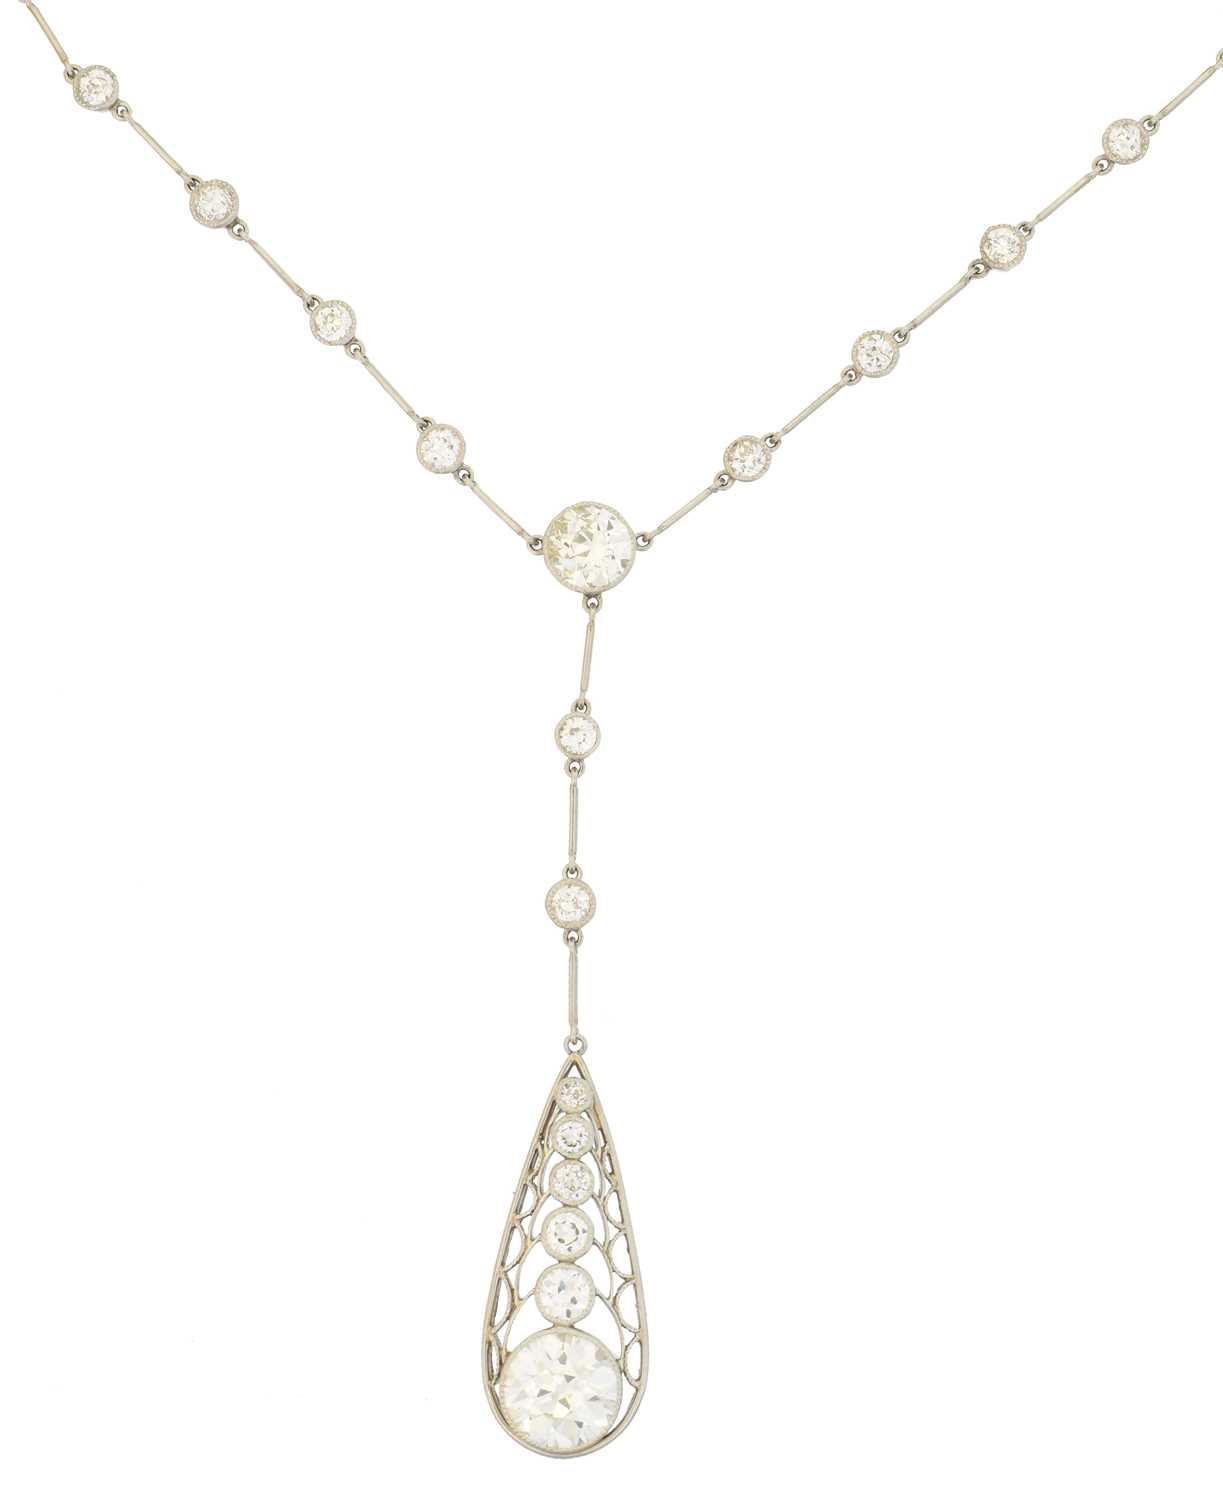 Lot 27 - An early 20th century diamond necklace